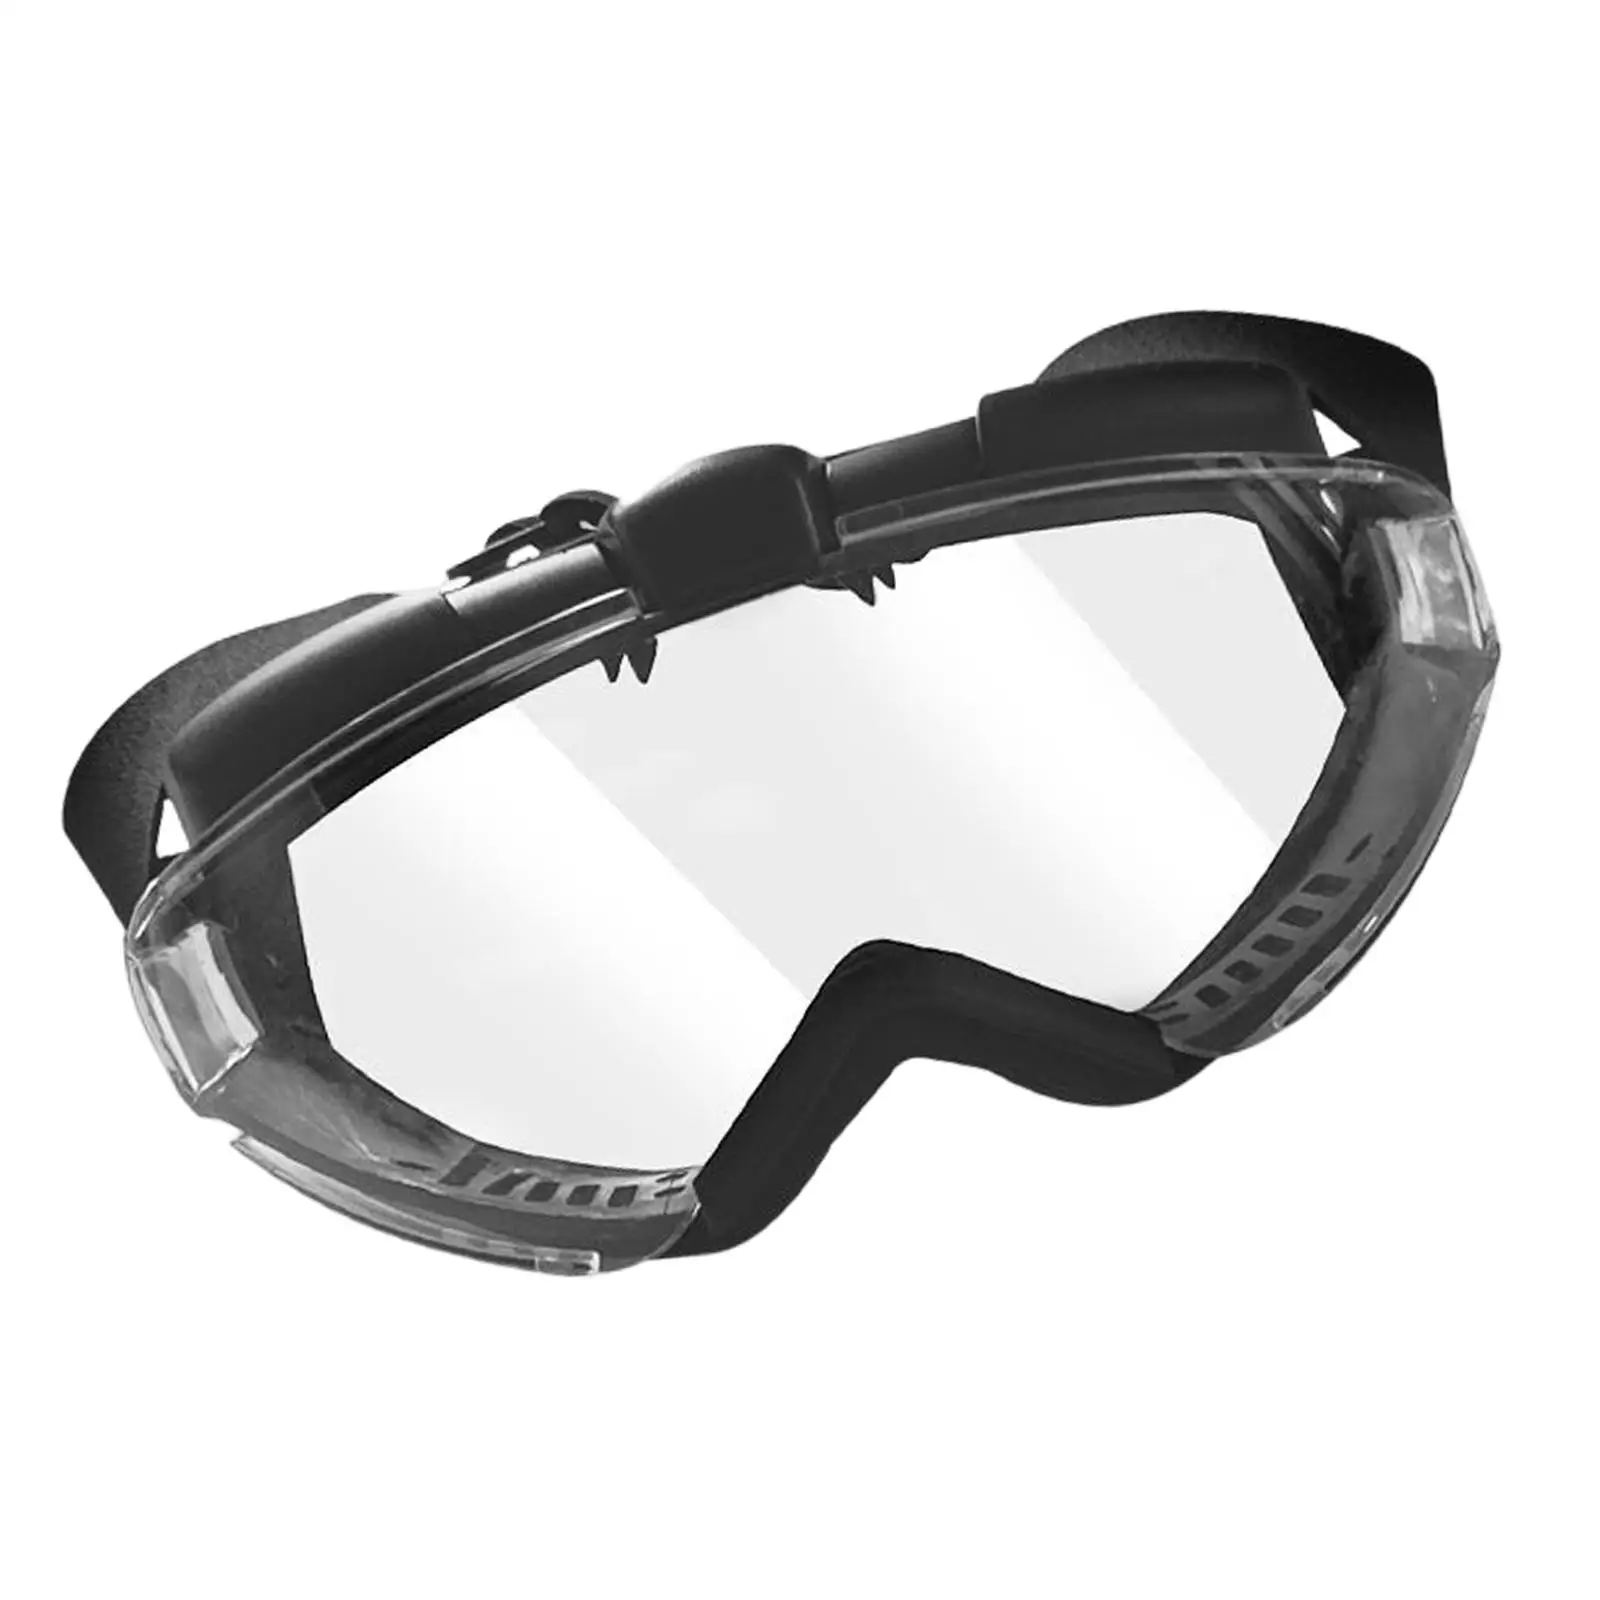 Outdoor Glasses Unisex with Adjustable Strap Windproof Dustproof Goggles